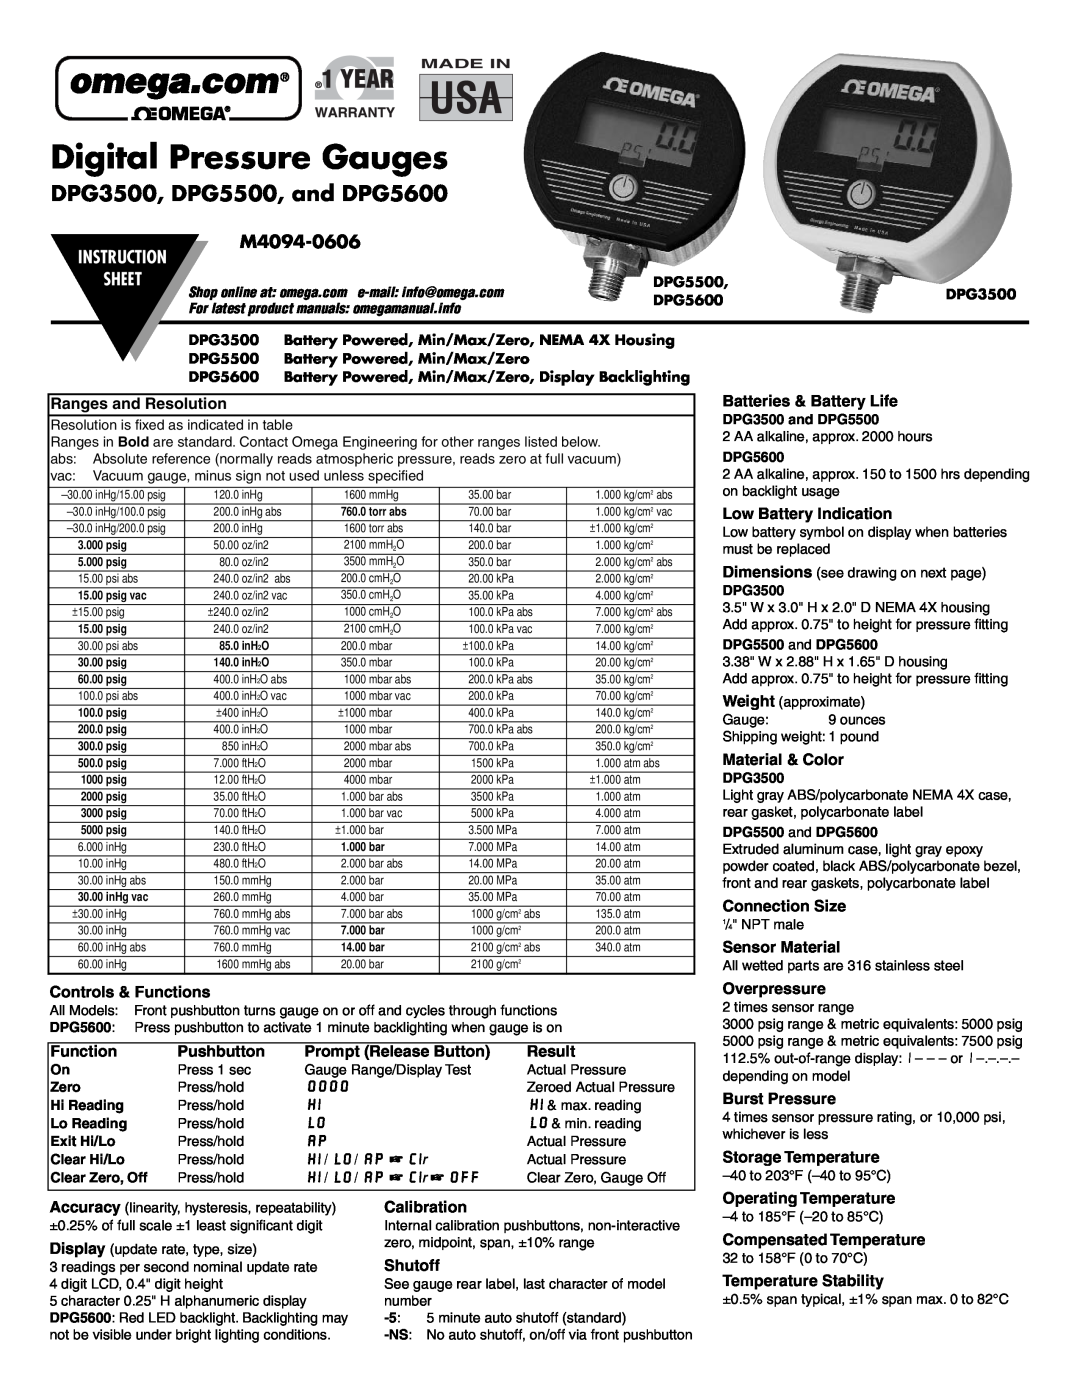 Omega DPG5600 instruction sheet M4094-0606, Ranges and Resolution, Controls & Functions, Pushbutton, Prompt Release Button 